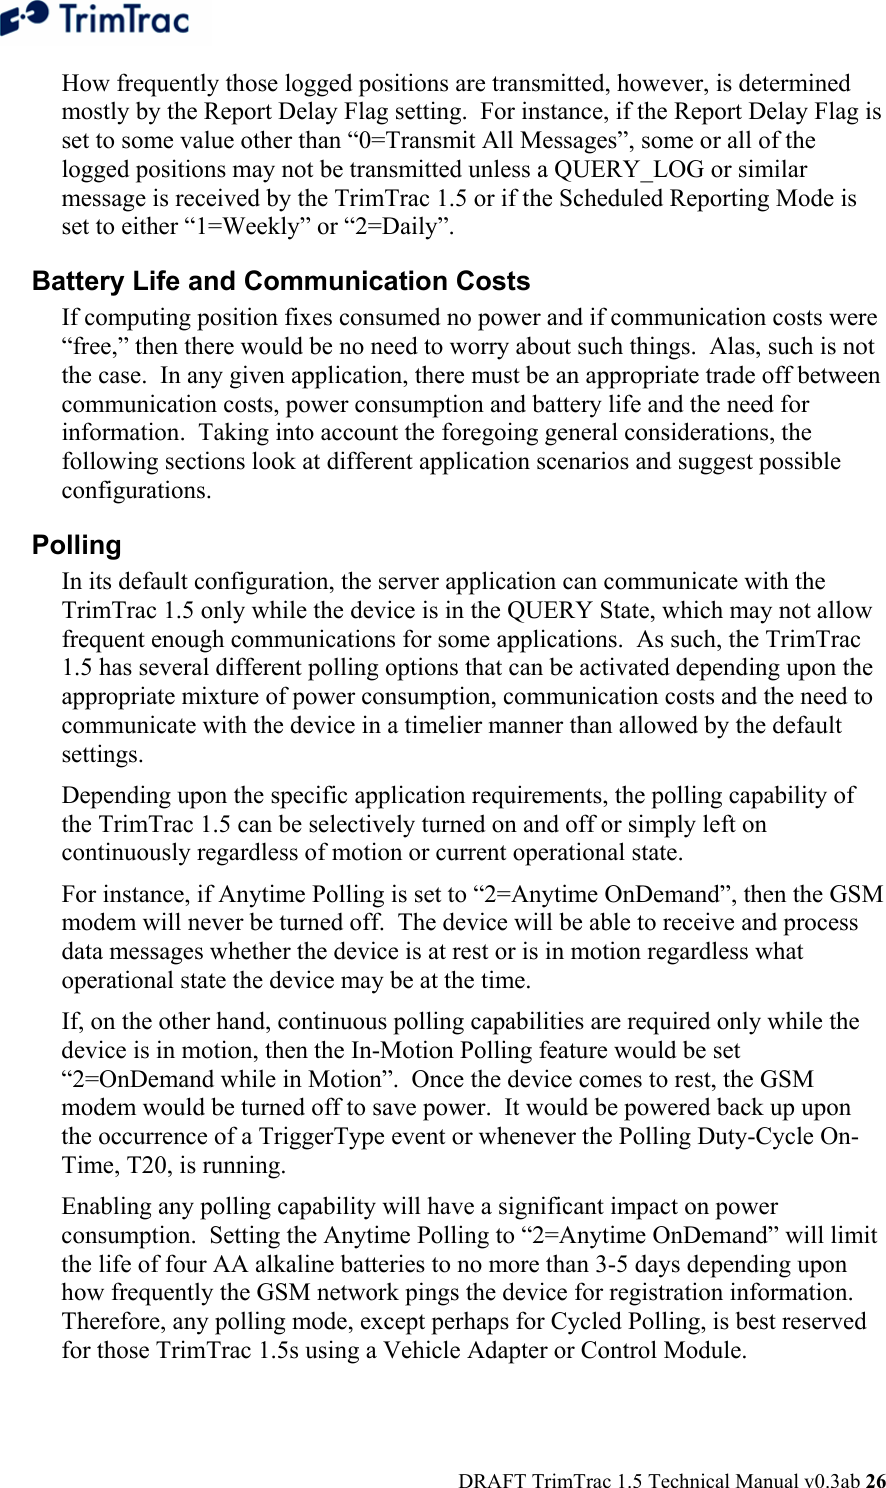  DRAFT TrimTrac 1.5 Technical Manual v0.3ab 26 How frequently those logged positions are transmitted, however, is determined mostly by the Report Delay Flag setting.  For instance, if the Report Delay Flag is set to some value other than “0=Transmit All Messages”, some or all of the logged positions may not be transmitted unless a QUERY_LOG or similar message is received by the TrimTrac 1.5 or if the Scheduled Reporting Mode is set to either “1=Weekly” or “2=Daily”. Battery Life and Communication Costs If computing position fixes consumed no power and if communication costs were “free,” then there would be no need to worry about such things.  Alas, such is not the case.  In any given application, there must be an appropriate trade off between communication costs, power consumption and battery life and the need for information.  Taking into account the foregoing general considerations, the following sections look at different application scenarios and suggest possible configurations. Polling In its default configuration, the server application can communicate with the TrimTrac 1.5 only while the device is in the QUERY State, which may not allow frequent enough communications for some applications.  As such, the TrimTrac 1.5 has several different polling options that can be activated depending upon the appropriate mixture of power consumption, communication costs and the need to communicate with the device in a timelier manner than allowed by the default settings. Depending upon the specific application requirements, the polling capability of the TrimTrac 1.5 can be selectively turned on and off or simply left on continuously regardless of motion or current operational state. For instance, if Anytime Polling is set to “2=Anytime OnDemand”, then the GSM modem will never be turned off.  The device will be able to receive and process data messages whether the device is at rest or is in motion regardless what operational state the device may be at the time. If, on the other hand, continuous polling capabilities are required only while the device is in motion, then the In-Motion Polling feature would be set “2=OnDemand while in Motion”.  Once the device comes to rest, the GSM modem would be turned off to save power.  It would be powered back up upon the occurrence of a TriggerType event or whenever the Polling Duty-Cycle On-Time, T20, is running. Enabling any polling capability will have a significant impact on power consumption.  Setting the Anytime Polling to “2=Anytime OnDemand” will limit the life of four AA alkaline batteries to no more than 3-5 days depending upon how frequently the GSM network pings the device for registration information.  Therefore, any polling mode, except perhaps for Cycled Polling, is best reserved for those TrimTrac 1.5s using a Vehicle Adapter or Control Module.   